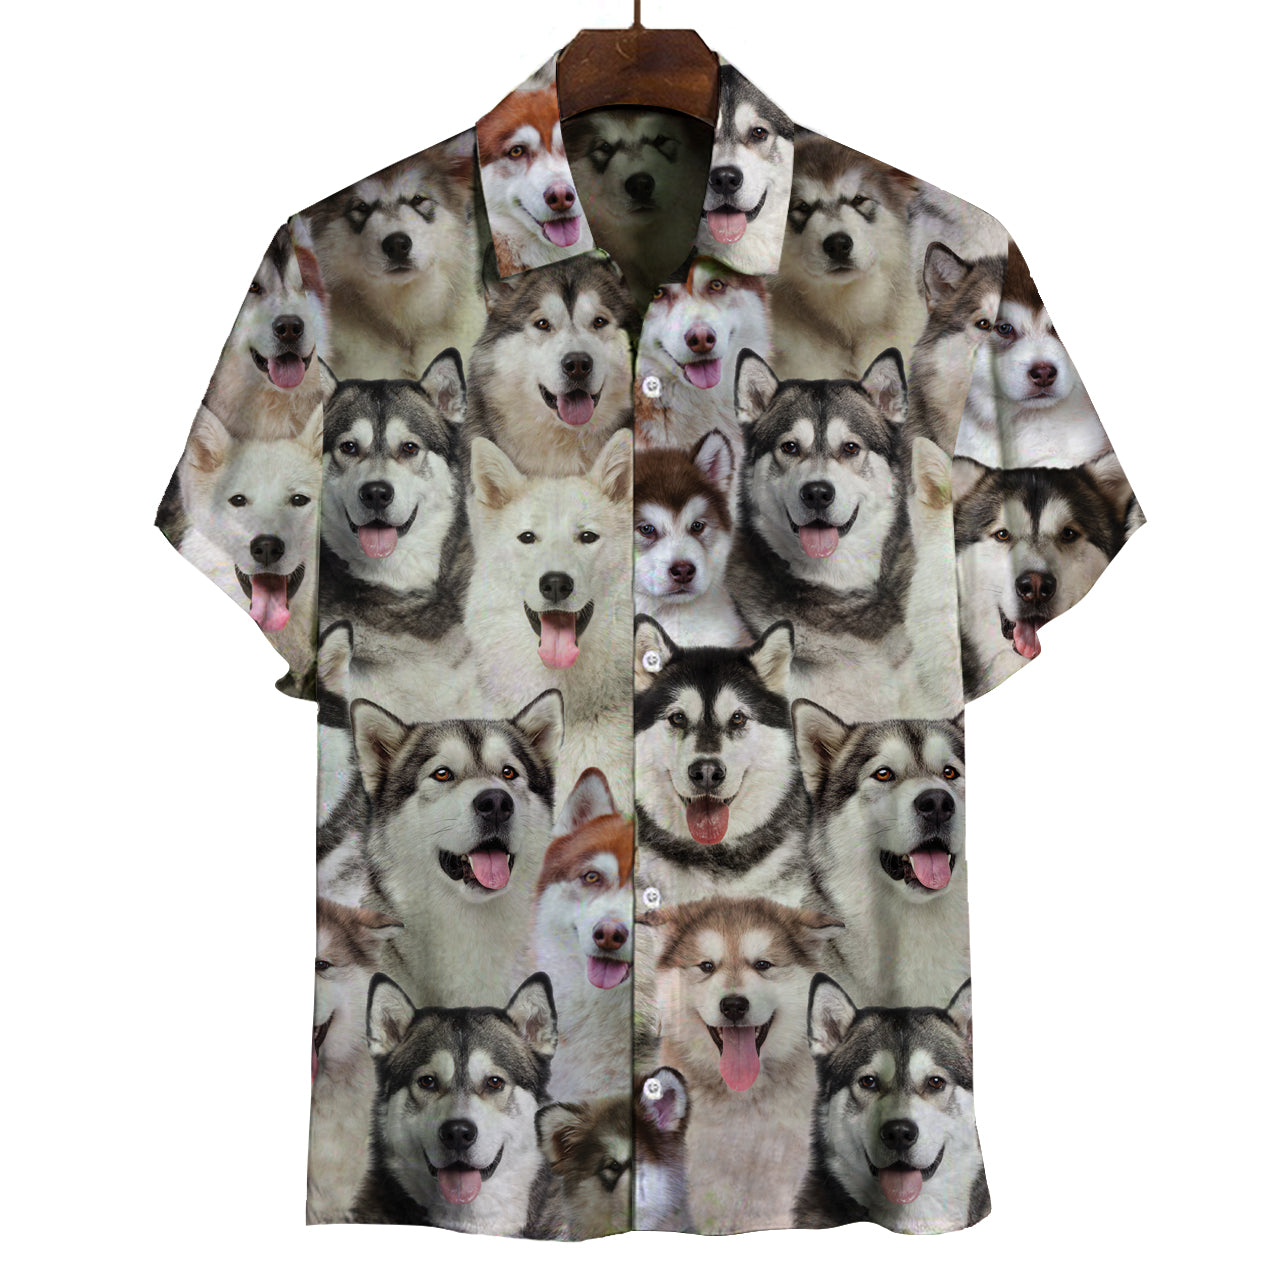 You Will Have A Bunch Of Alaskan Malamutes - Shirt V1